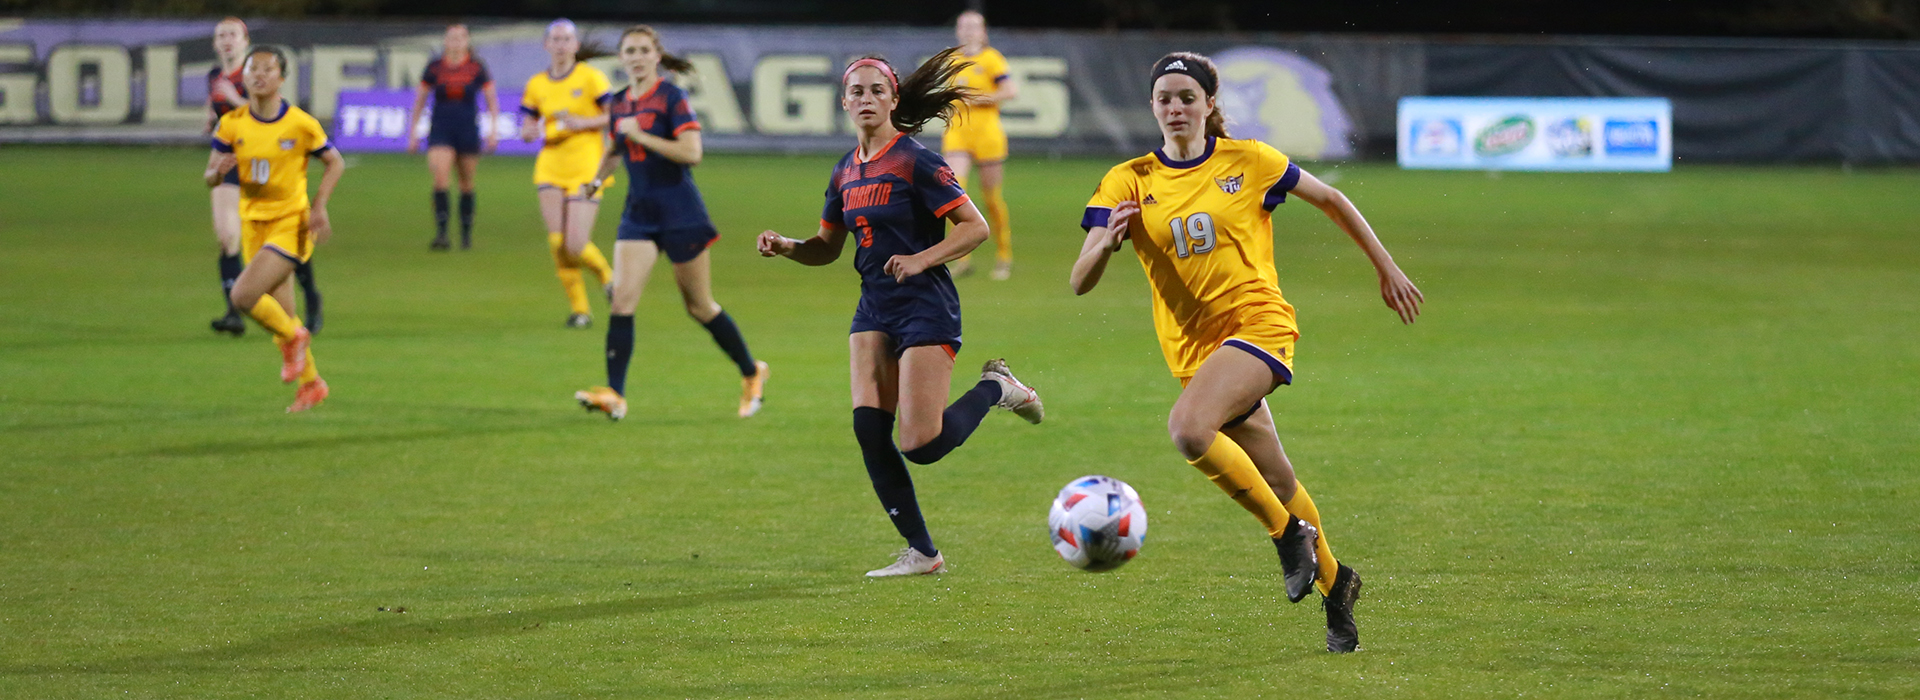 Golden Eagles downed in double overtime by UT Martin